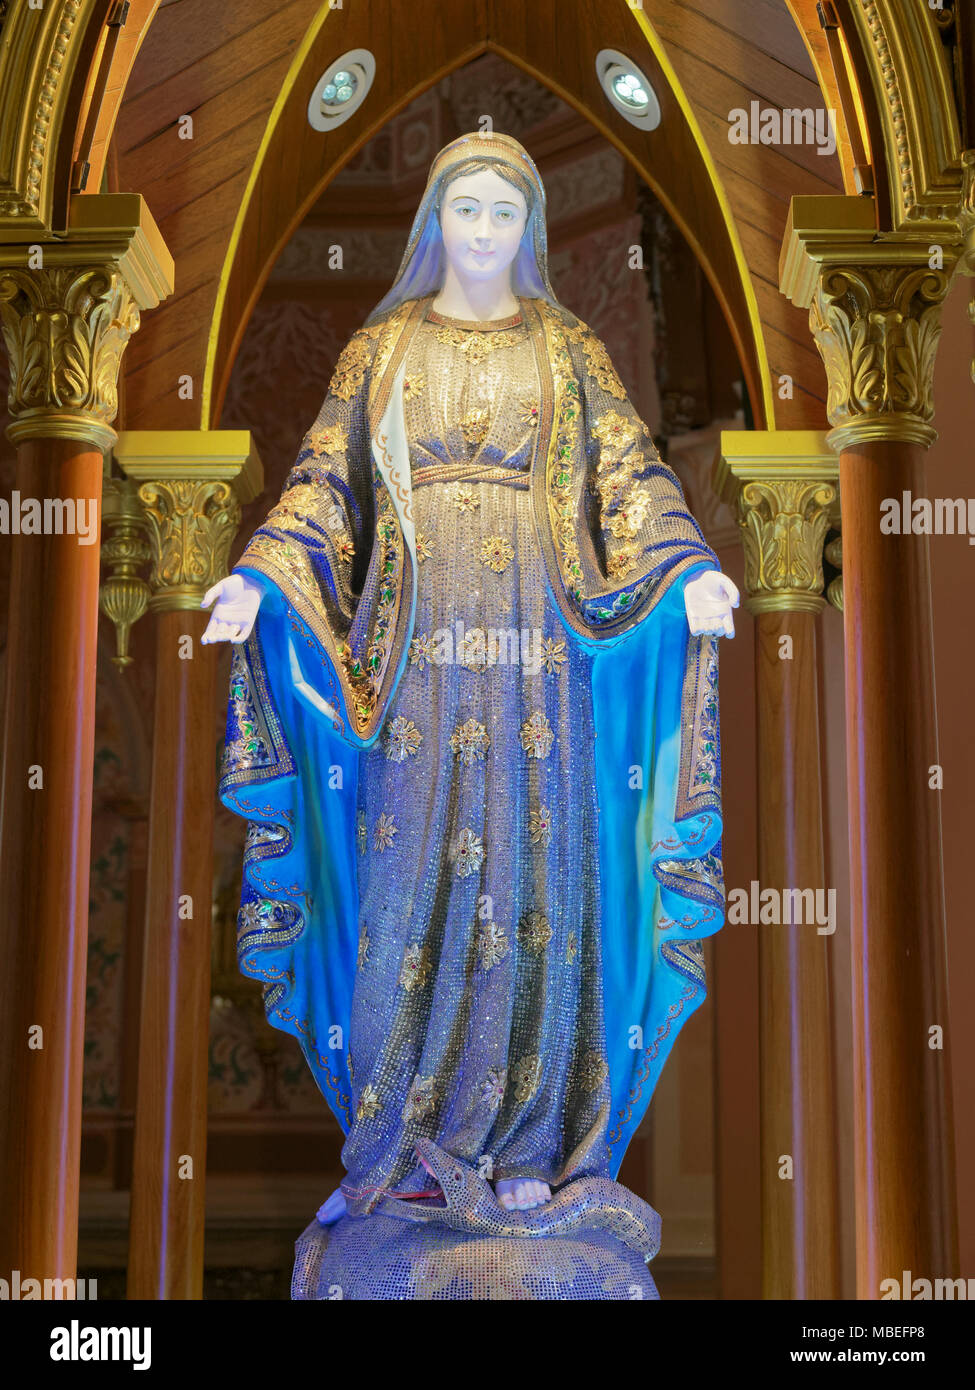 Blessed Virgin Mary, mother of Jesus, sculpture under an arch with ...